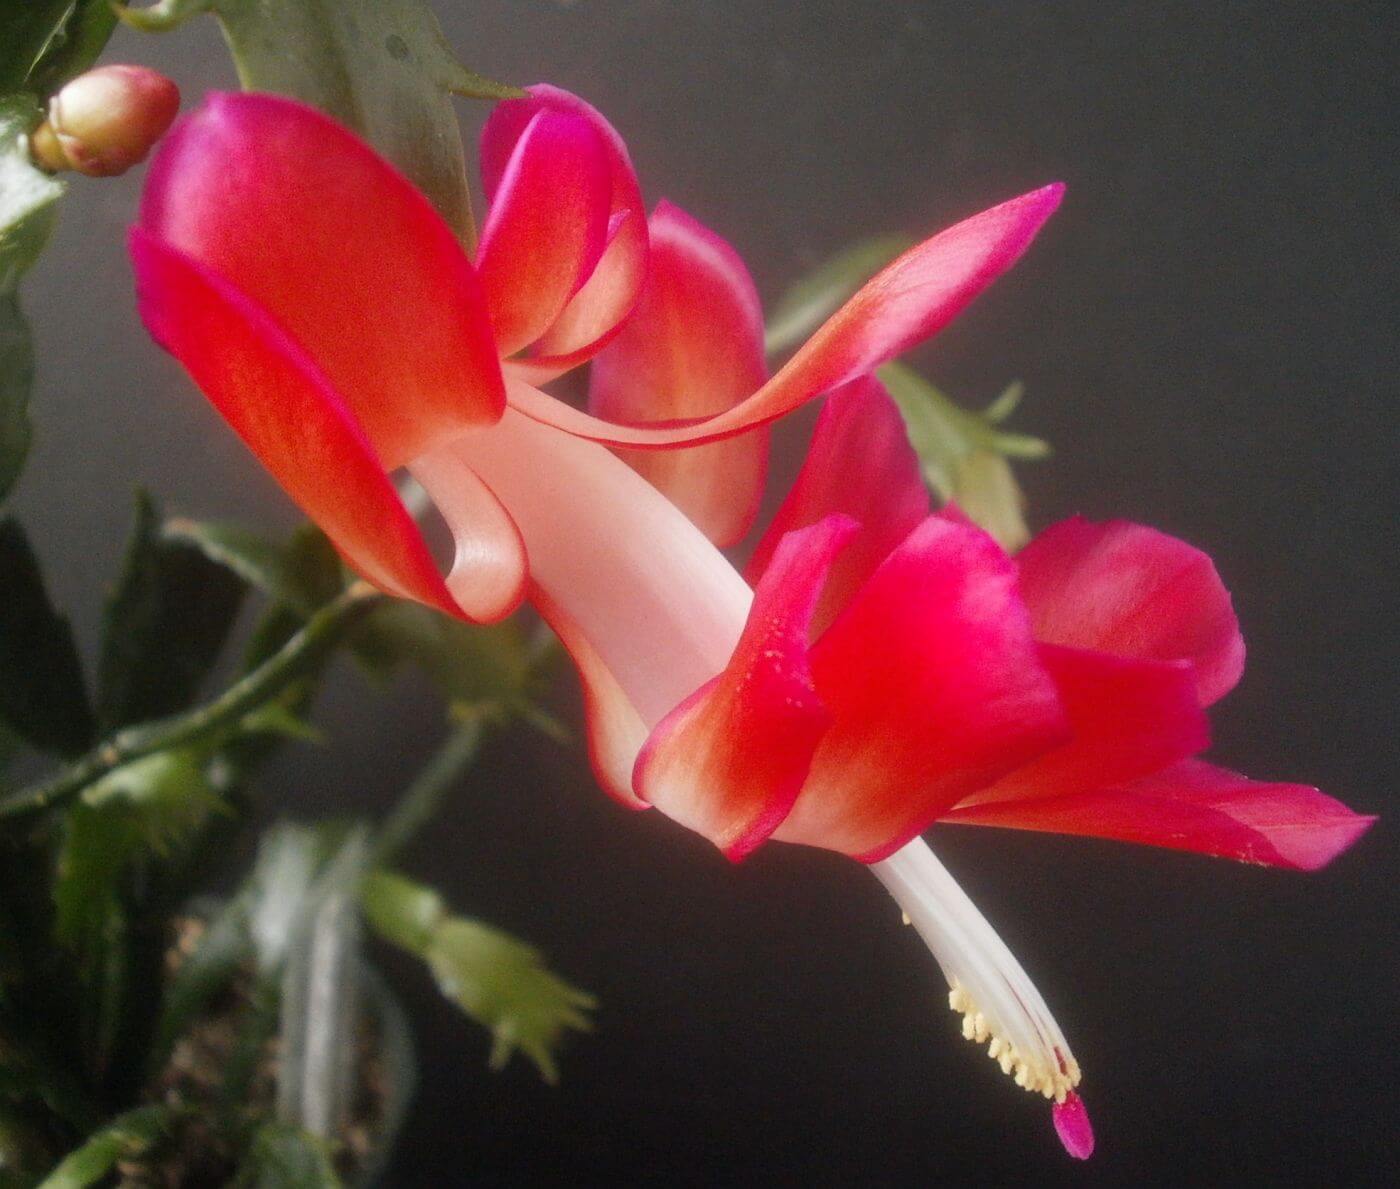 The schlumbergera truncata in bloom, unveiling their stamens (male) and gynoecium (female).